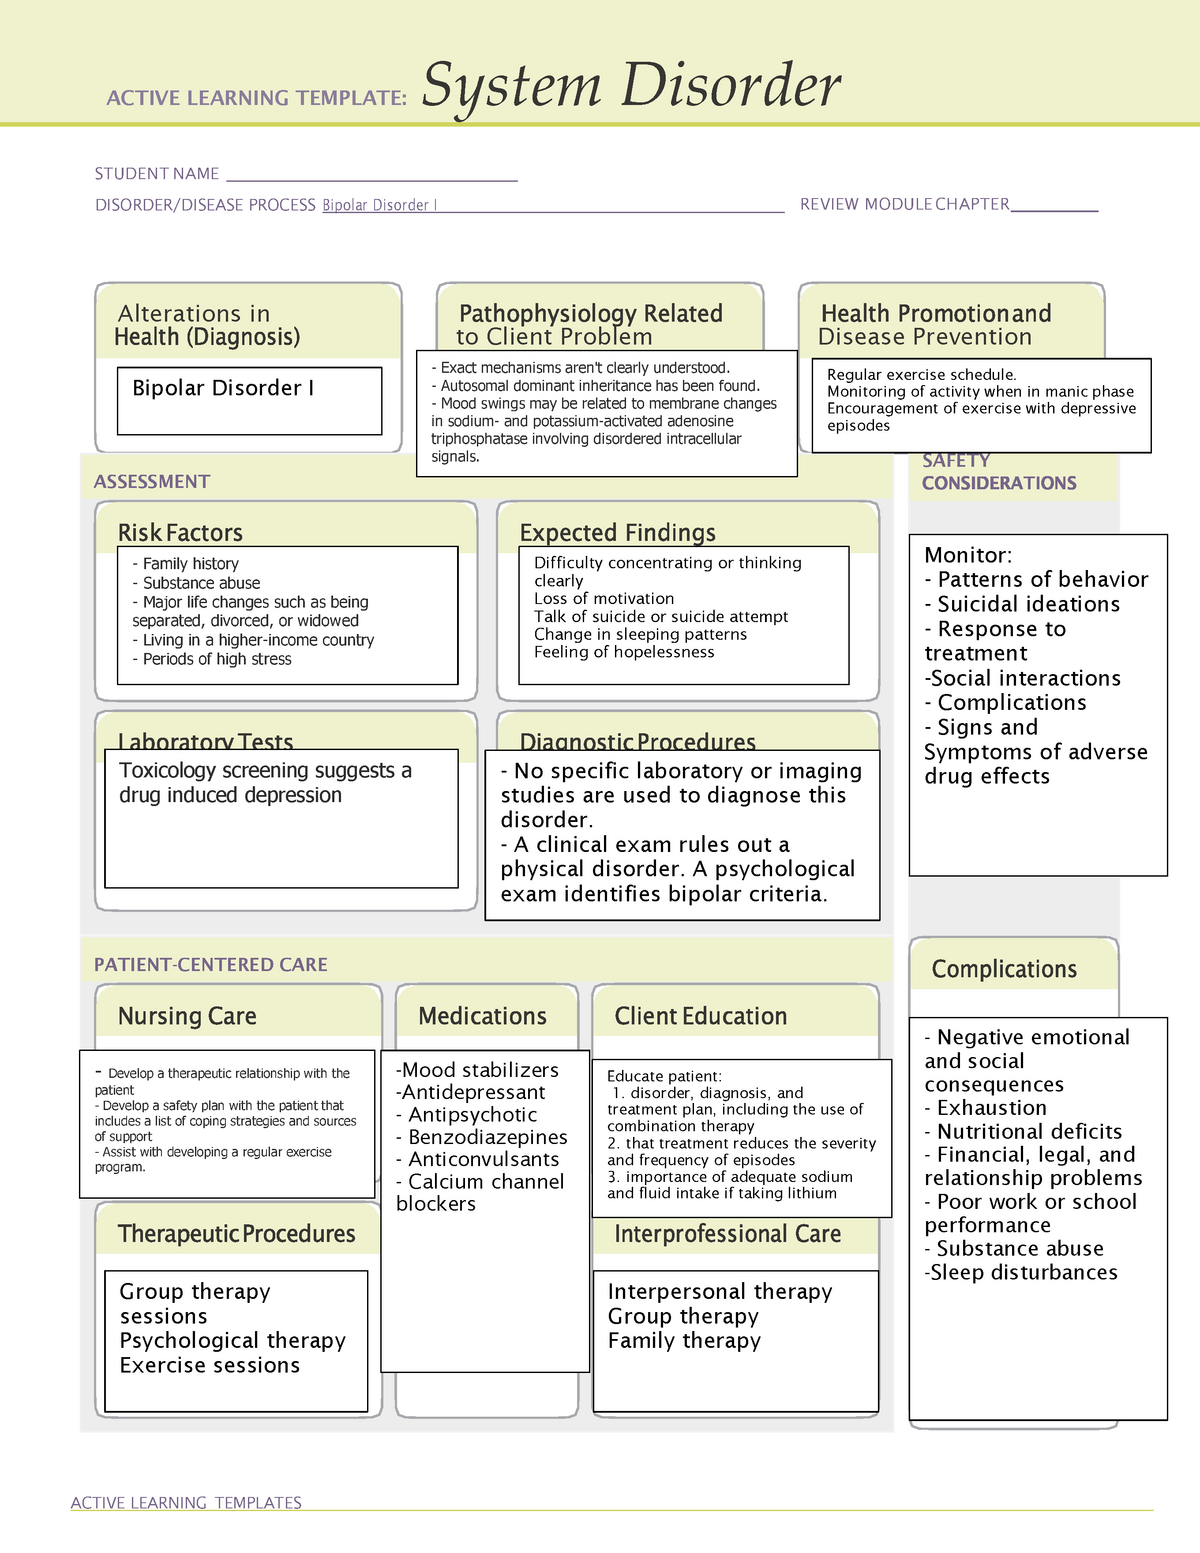 ATI System Disorder Bipolar ACTIVE LEARNING TEMPLATE: System Disorder